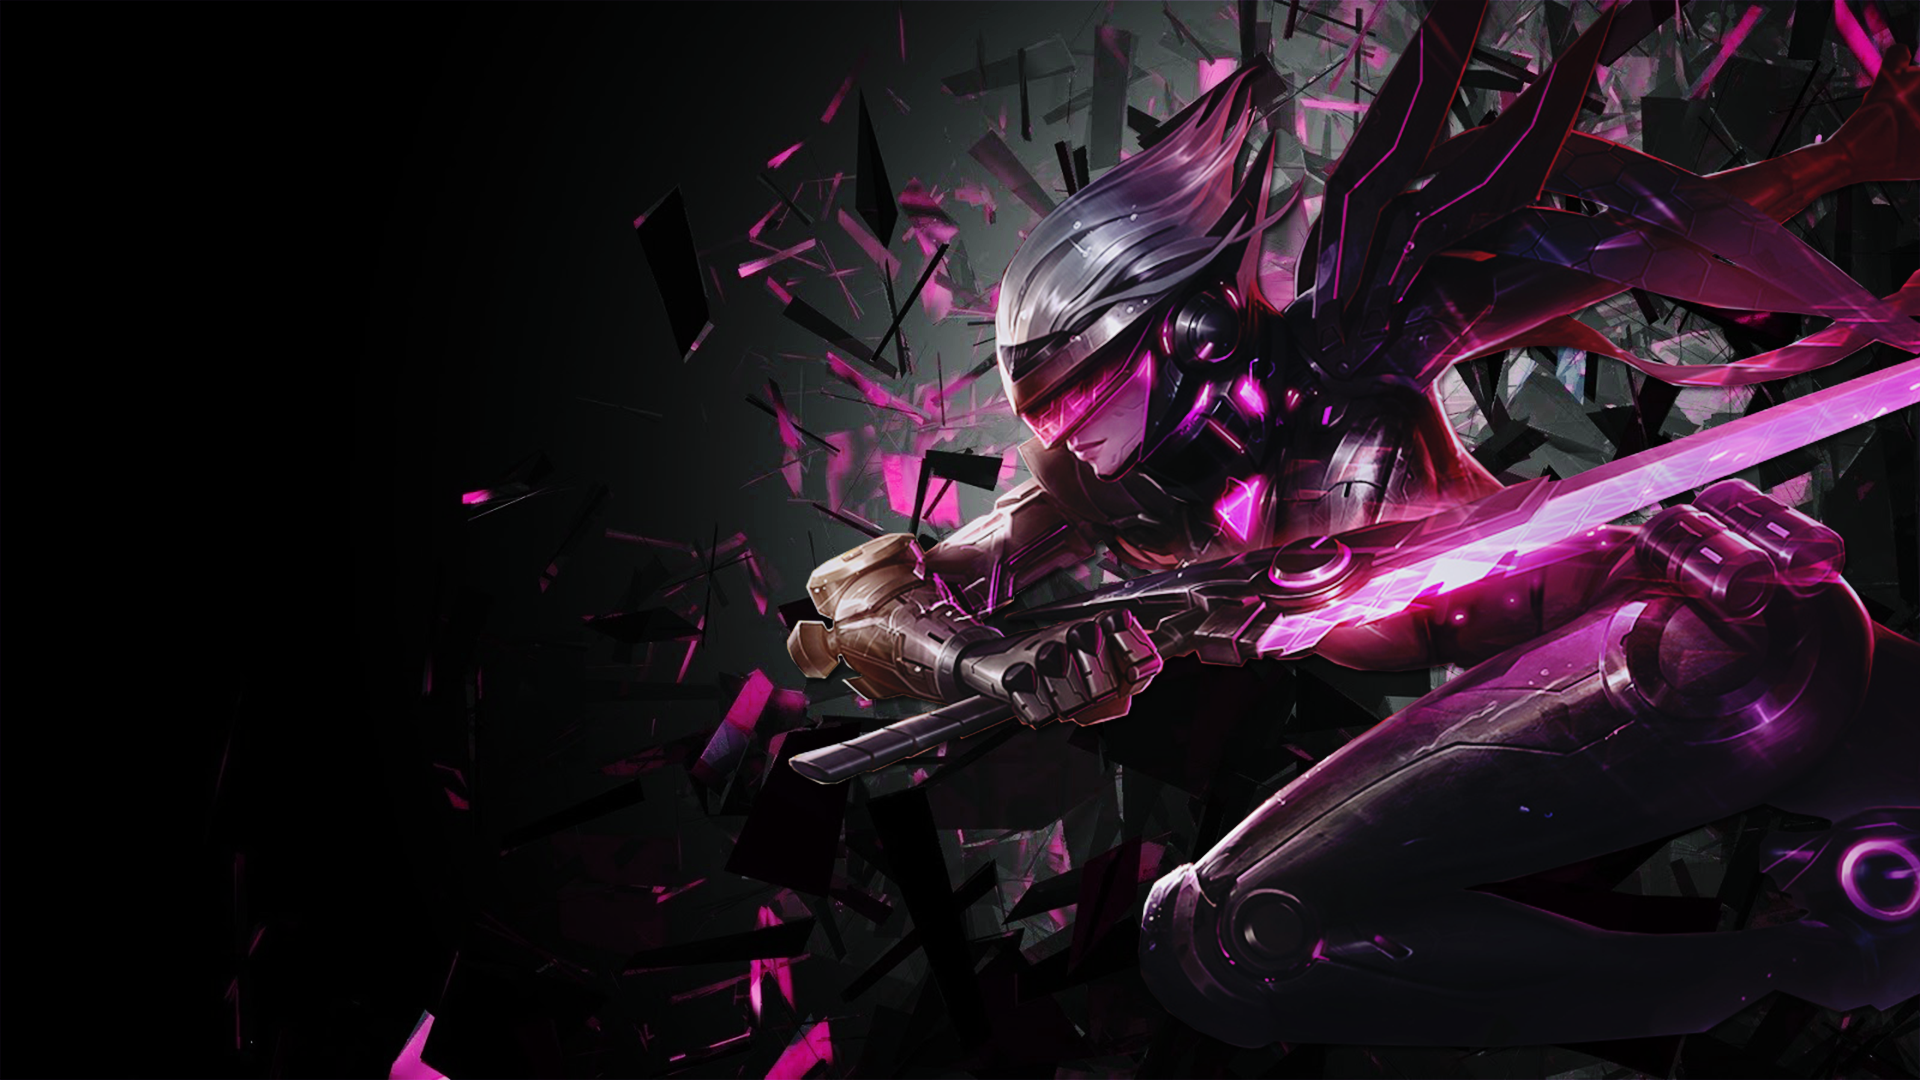 Project Yasuo Fiora Wallpaper Collection 17 Wallpapers HD Wallpapers Download Free Map Images Wallpaper [wallpaper376.blogspot.com]